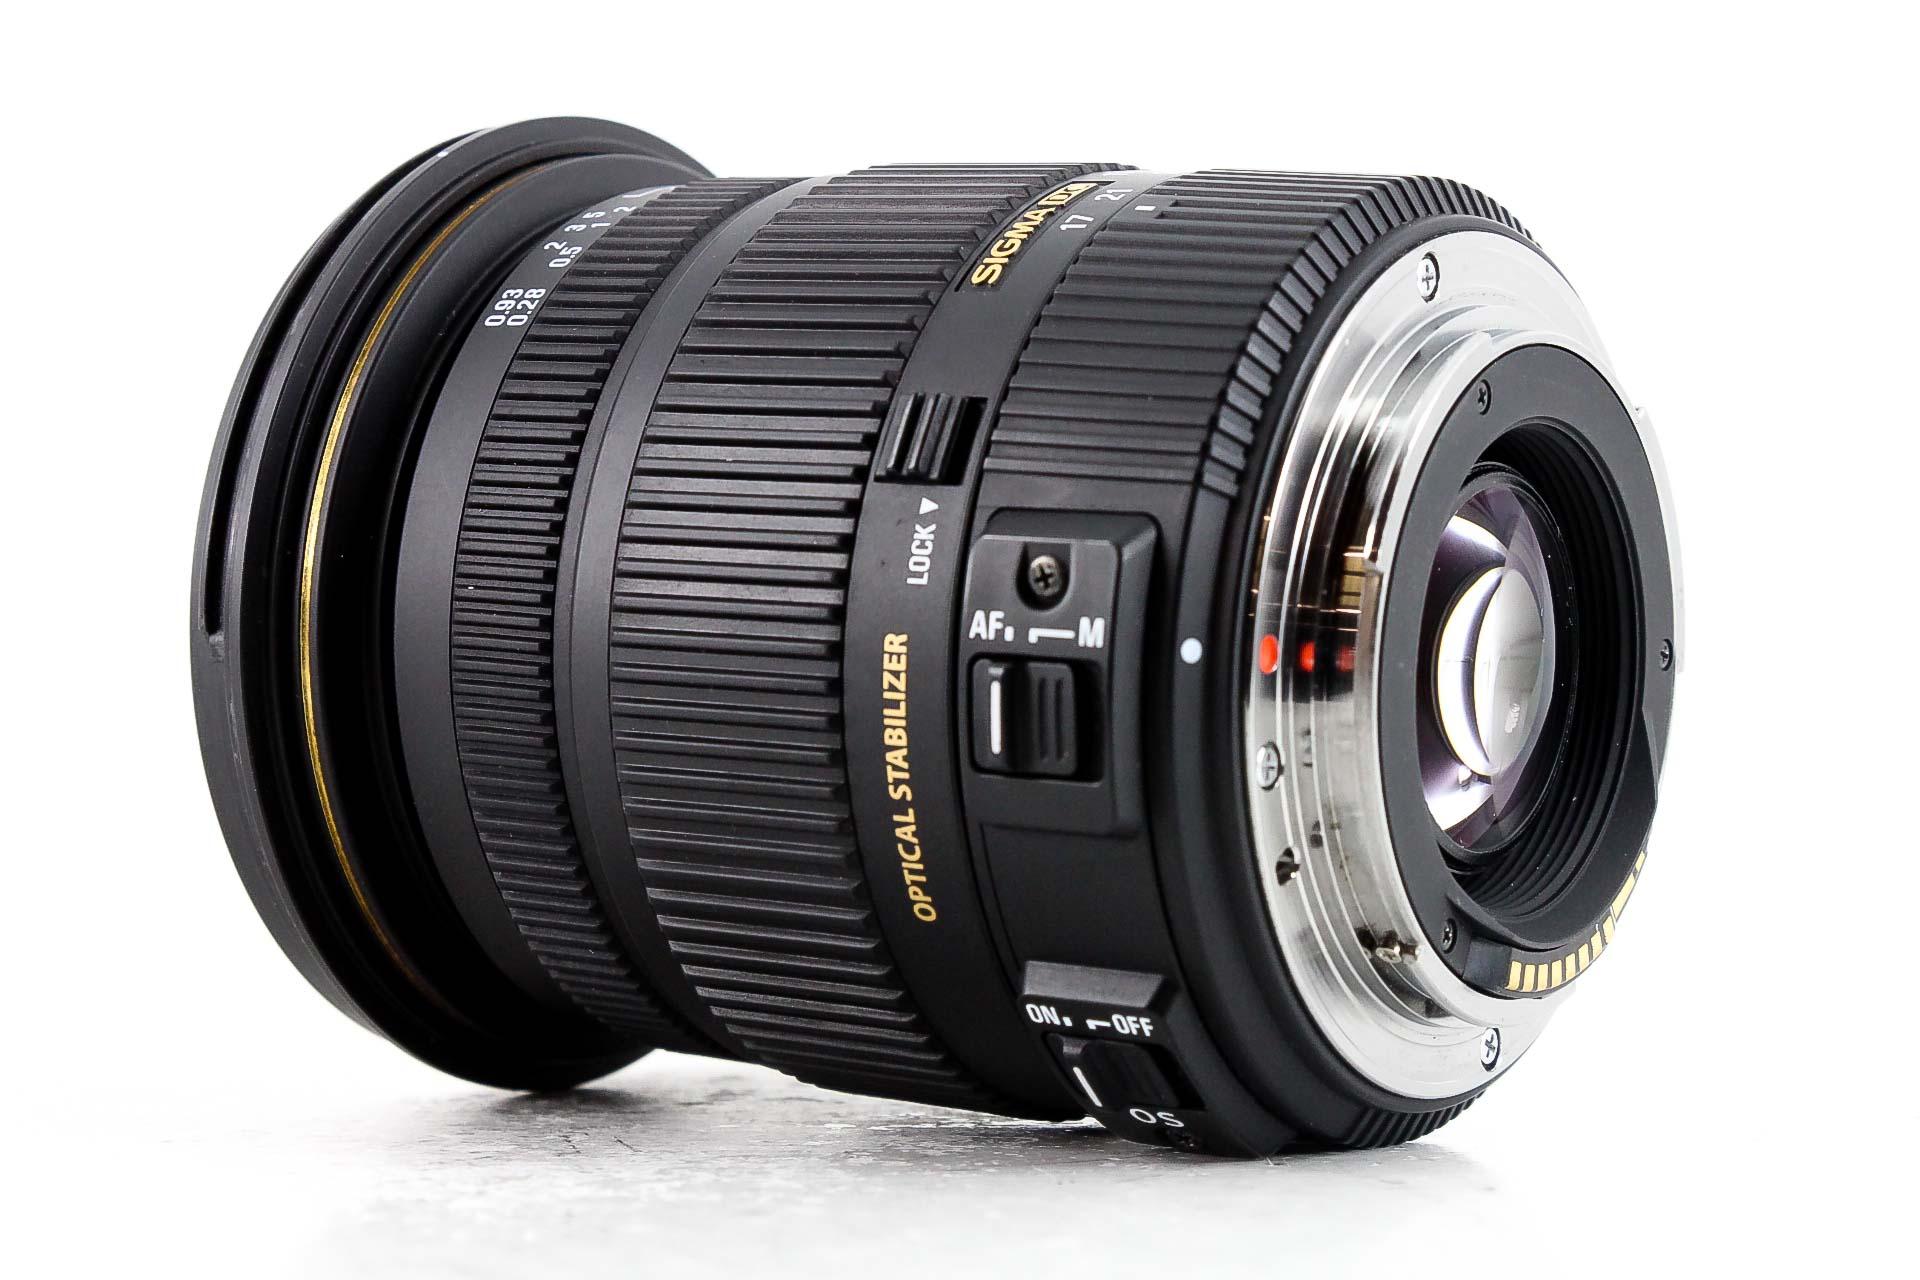 Sigma 17-50mm F2.8 EX DC OS HSM Lens for Canon